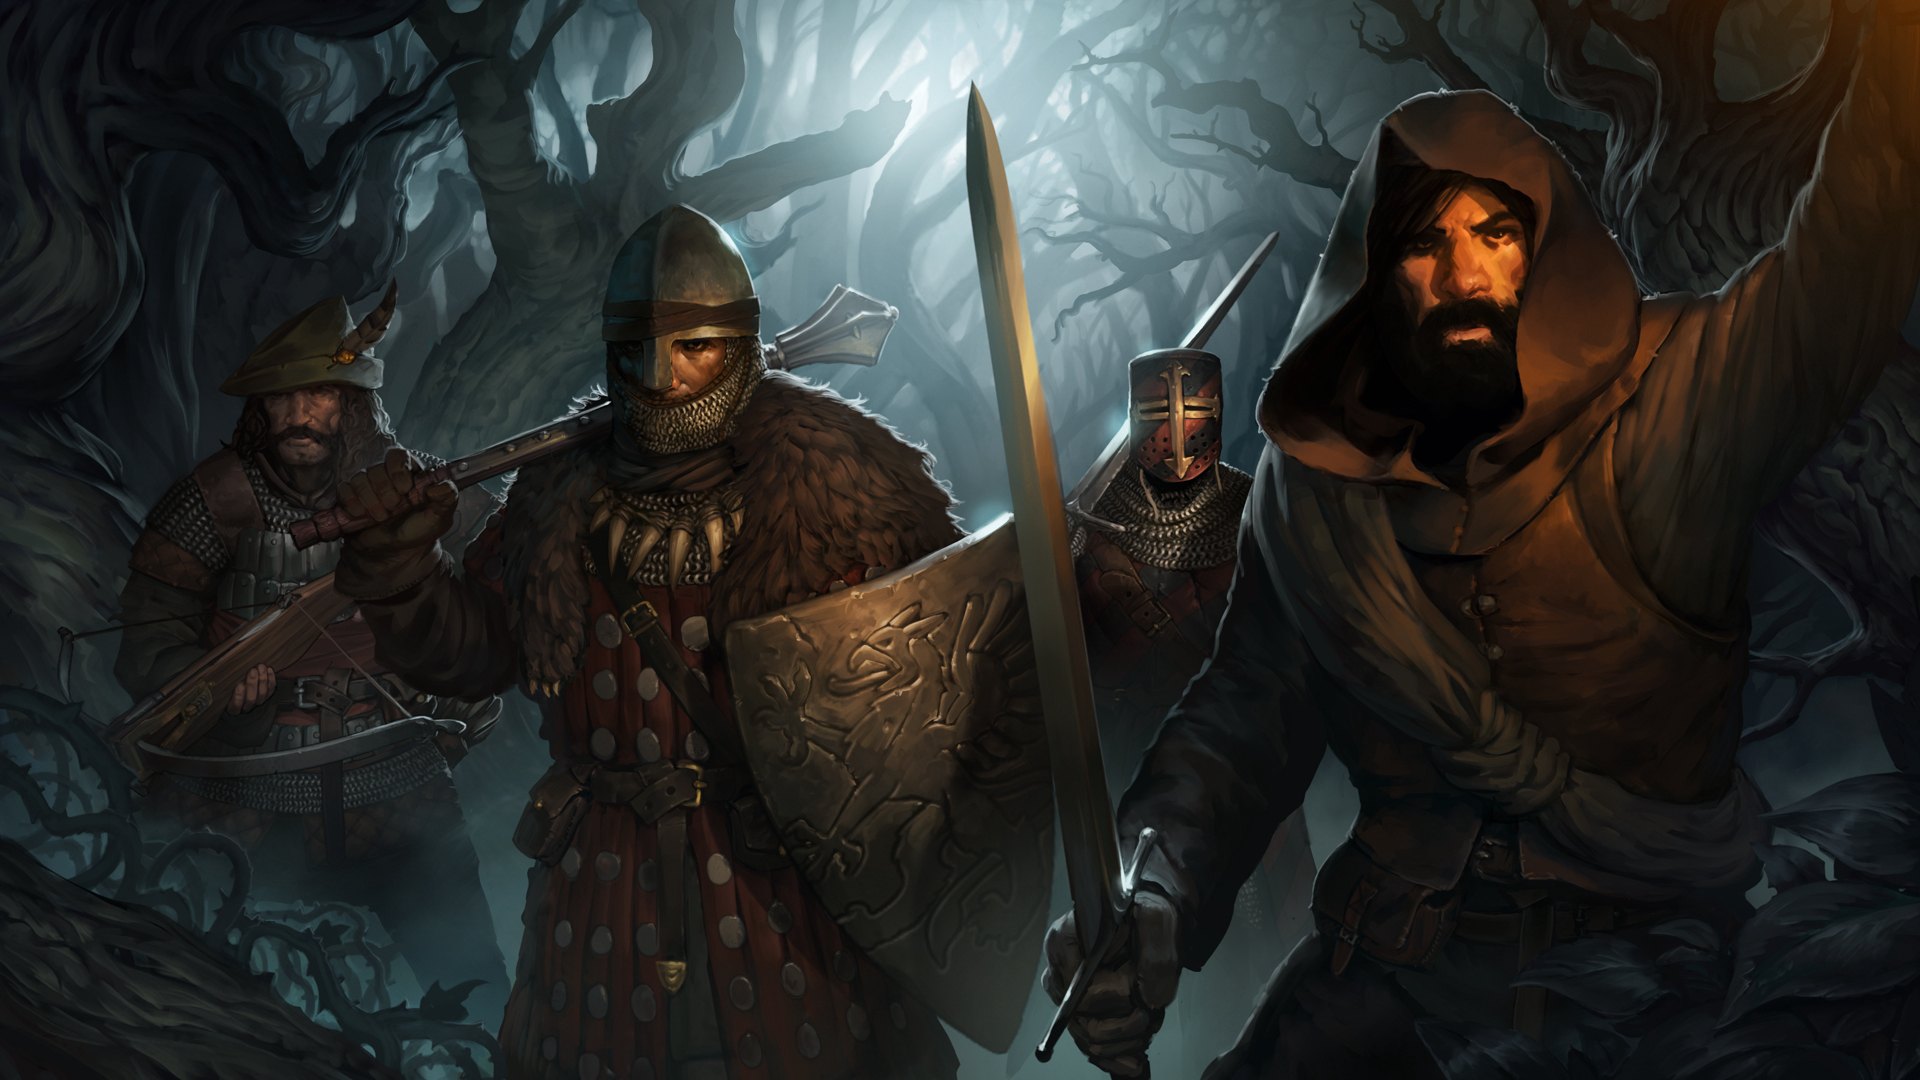 The 'Beasts & Exploration' DLC for Battle Brothers expands th...